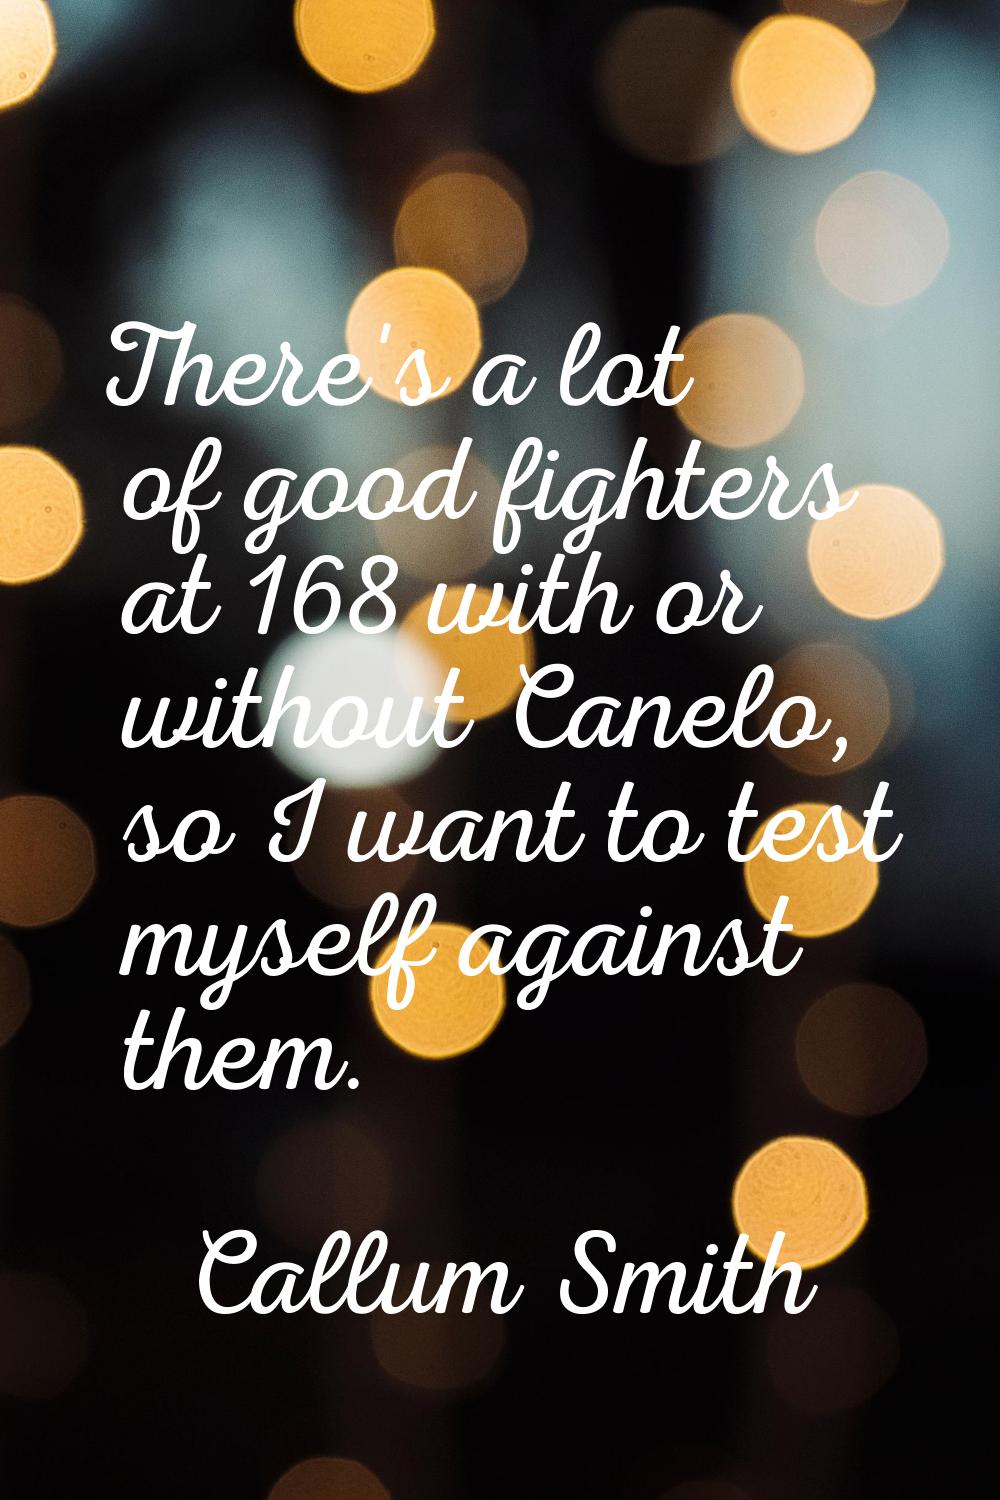 There's a lot of good fighters at 168 with or without Canelo, so I want to test myself against them